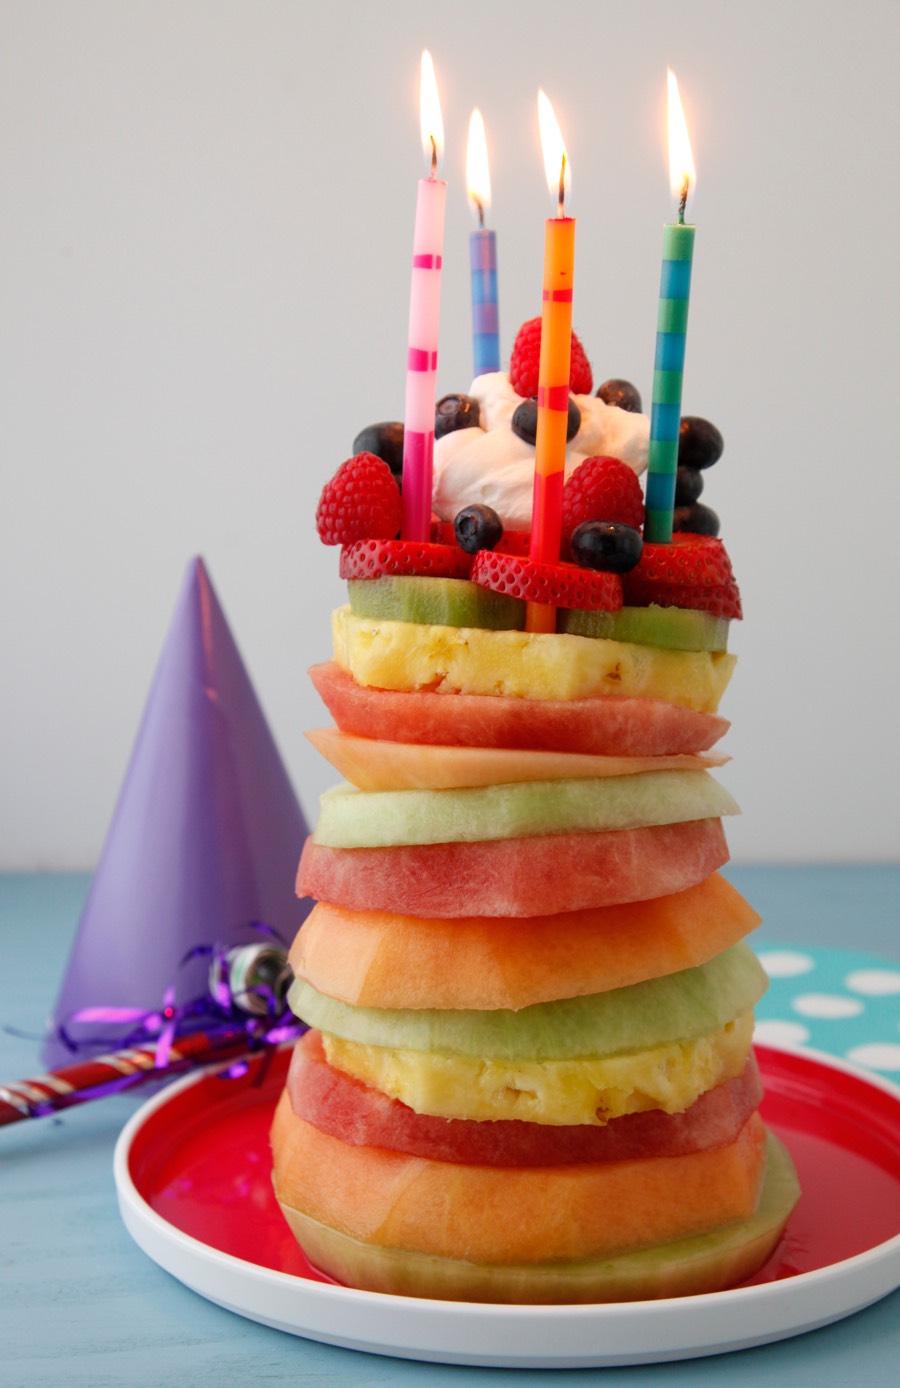 Fruit Tower Birthday Cake from weelicious.com